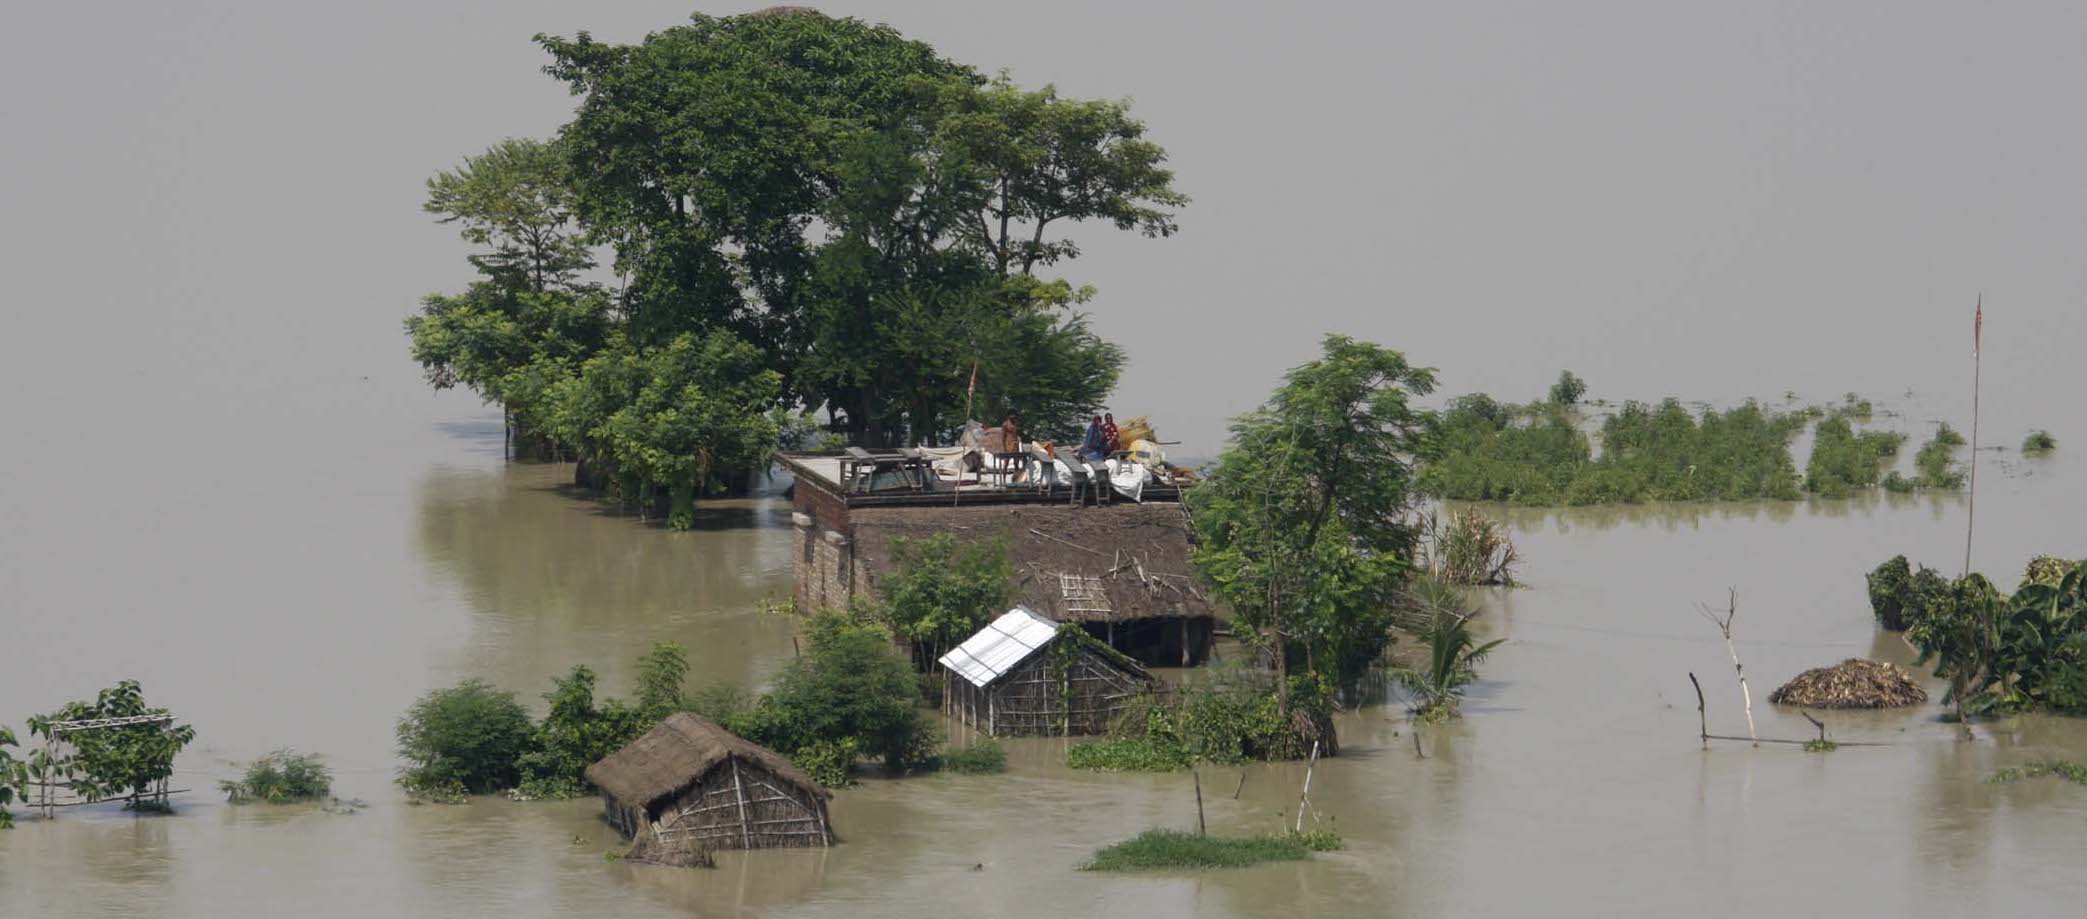 A group of submerged houses in India